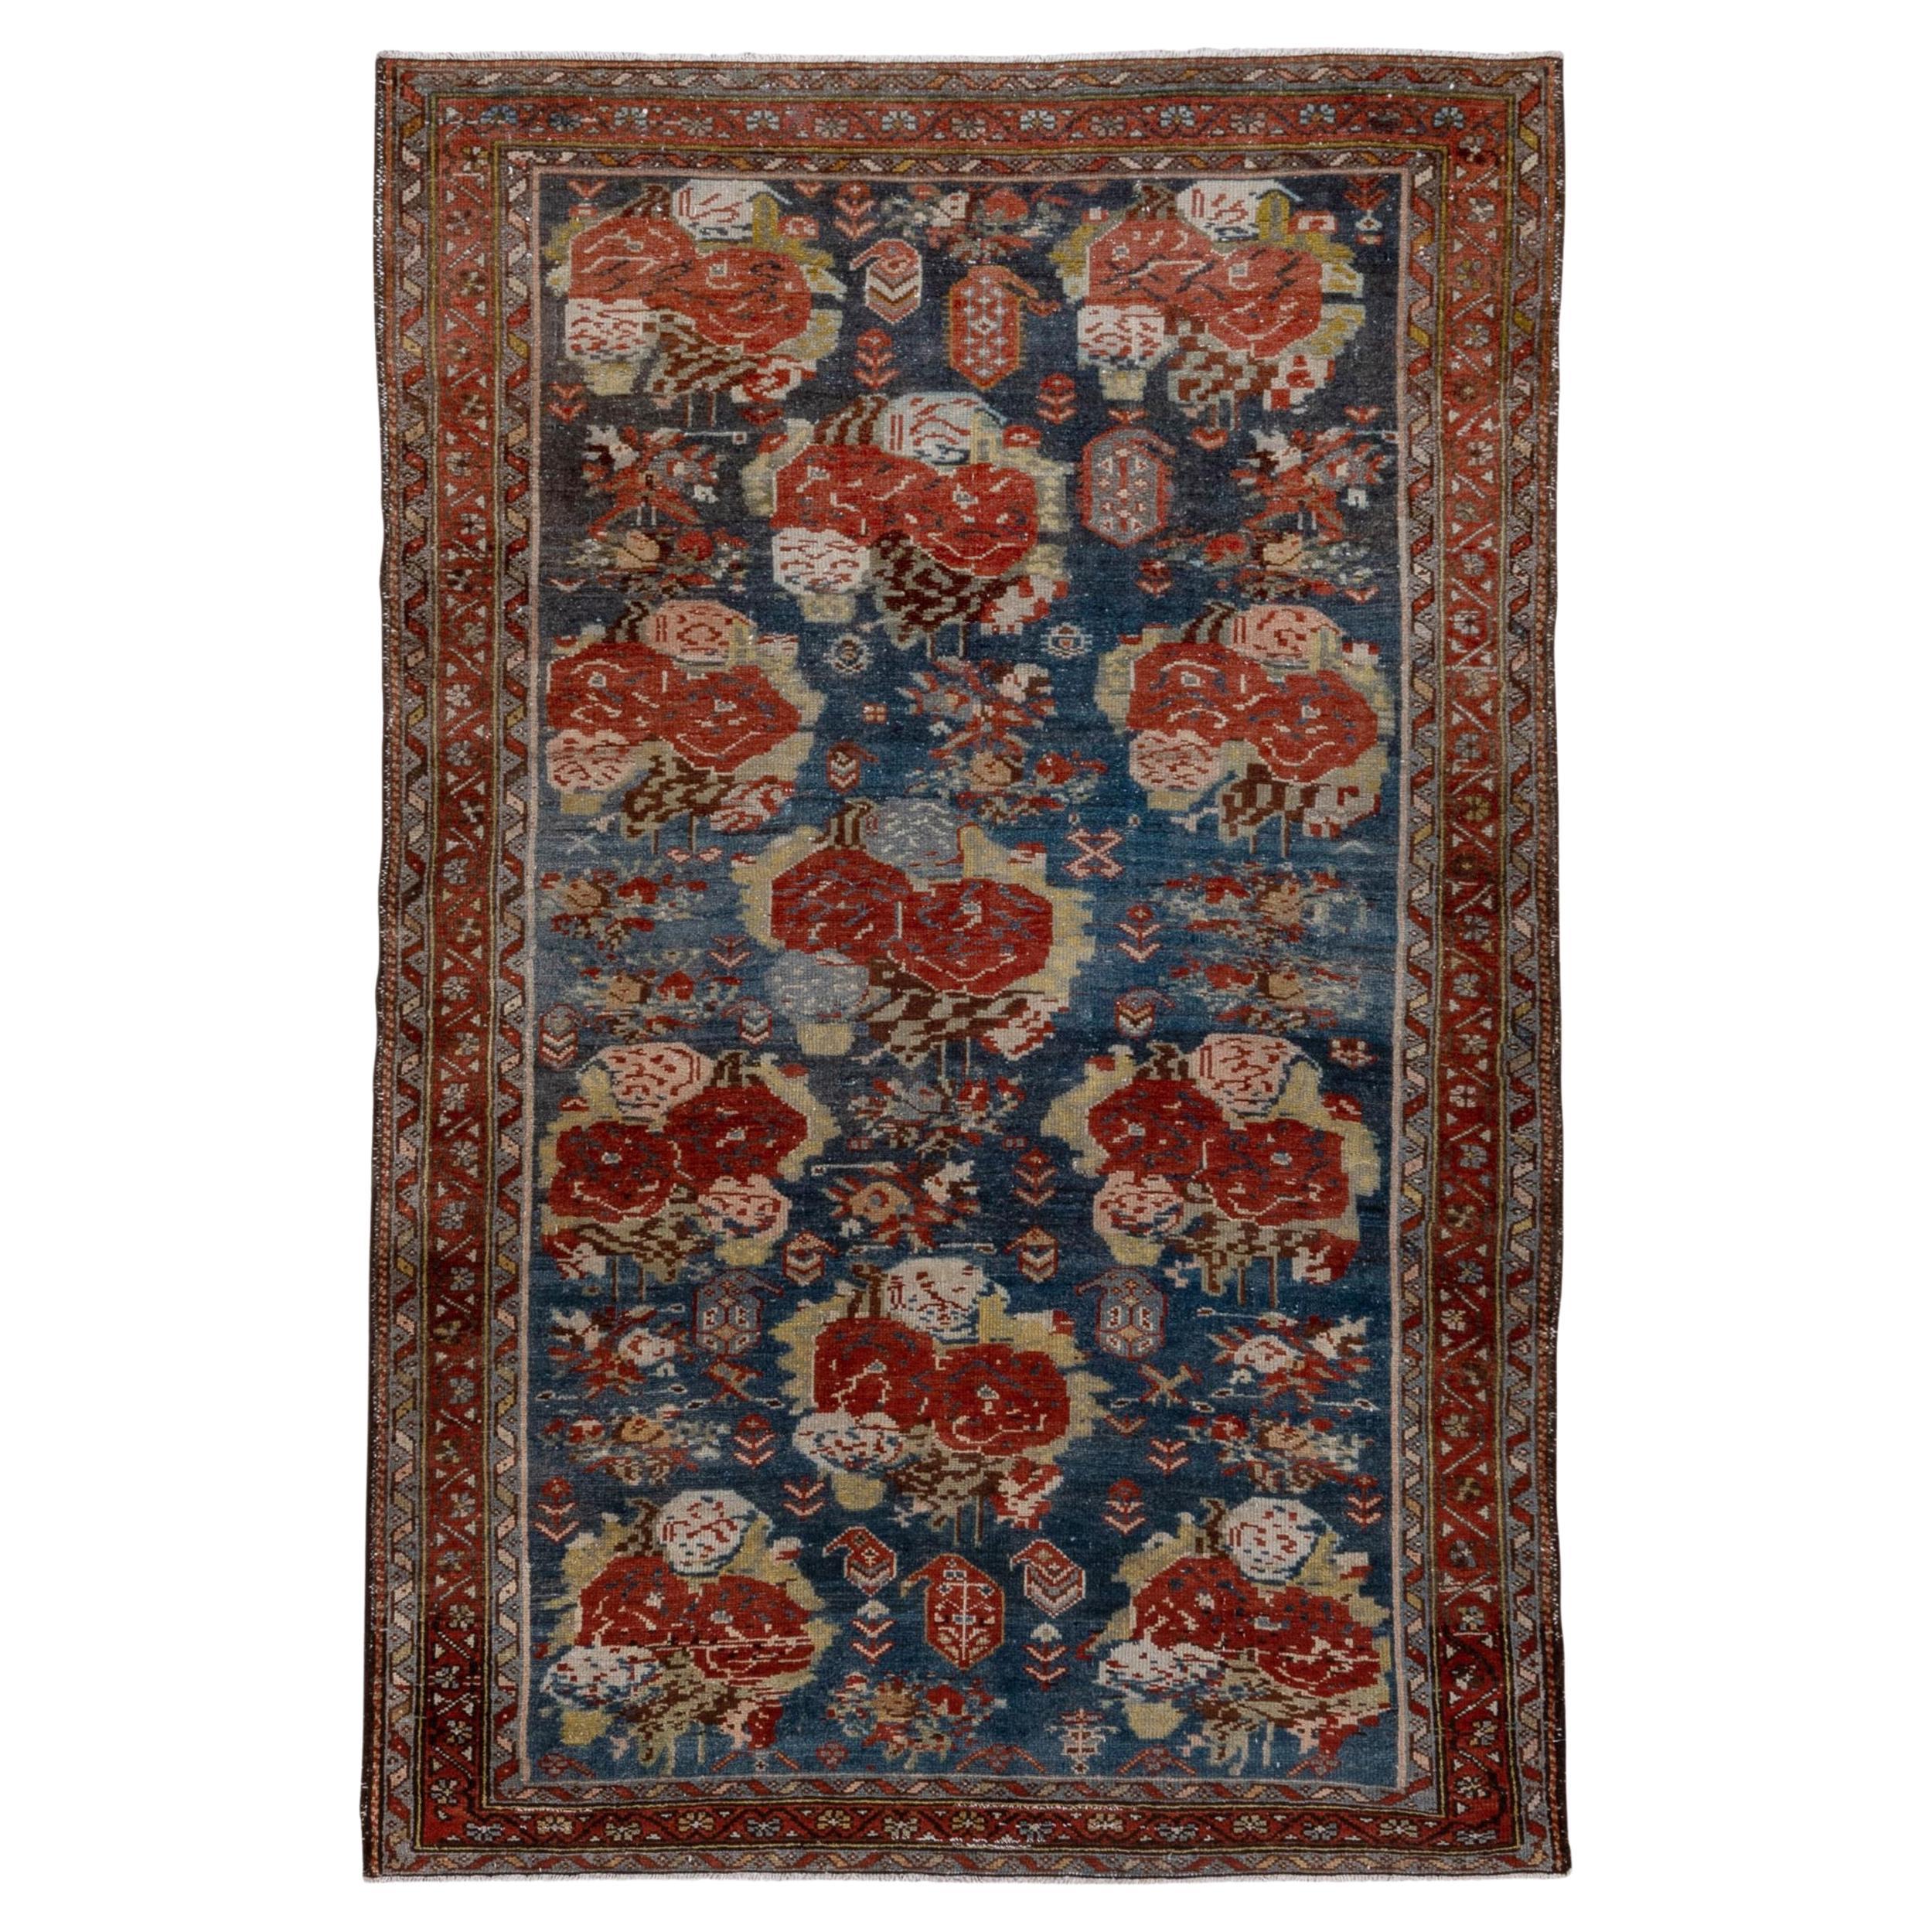 Antique Floral Malayer Rug